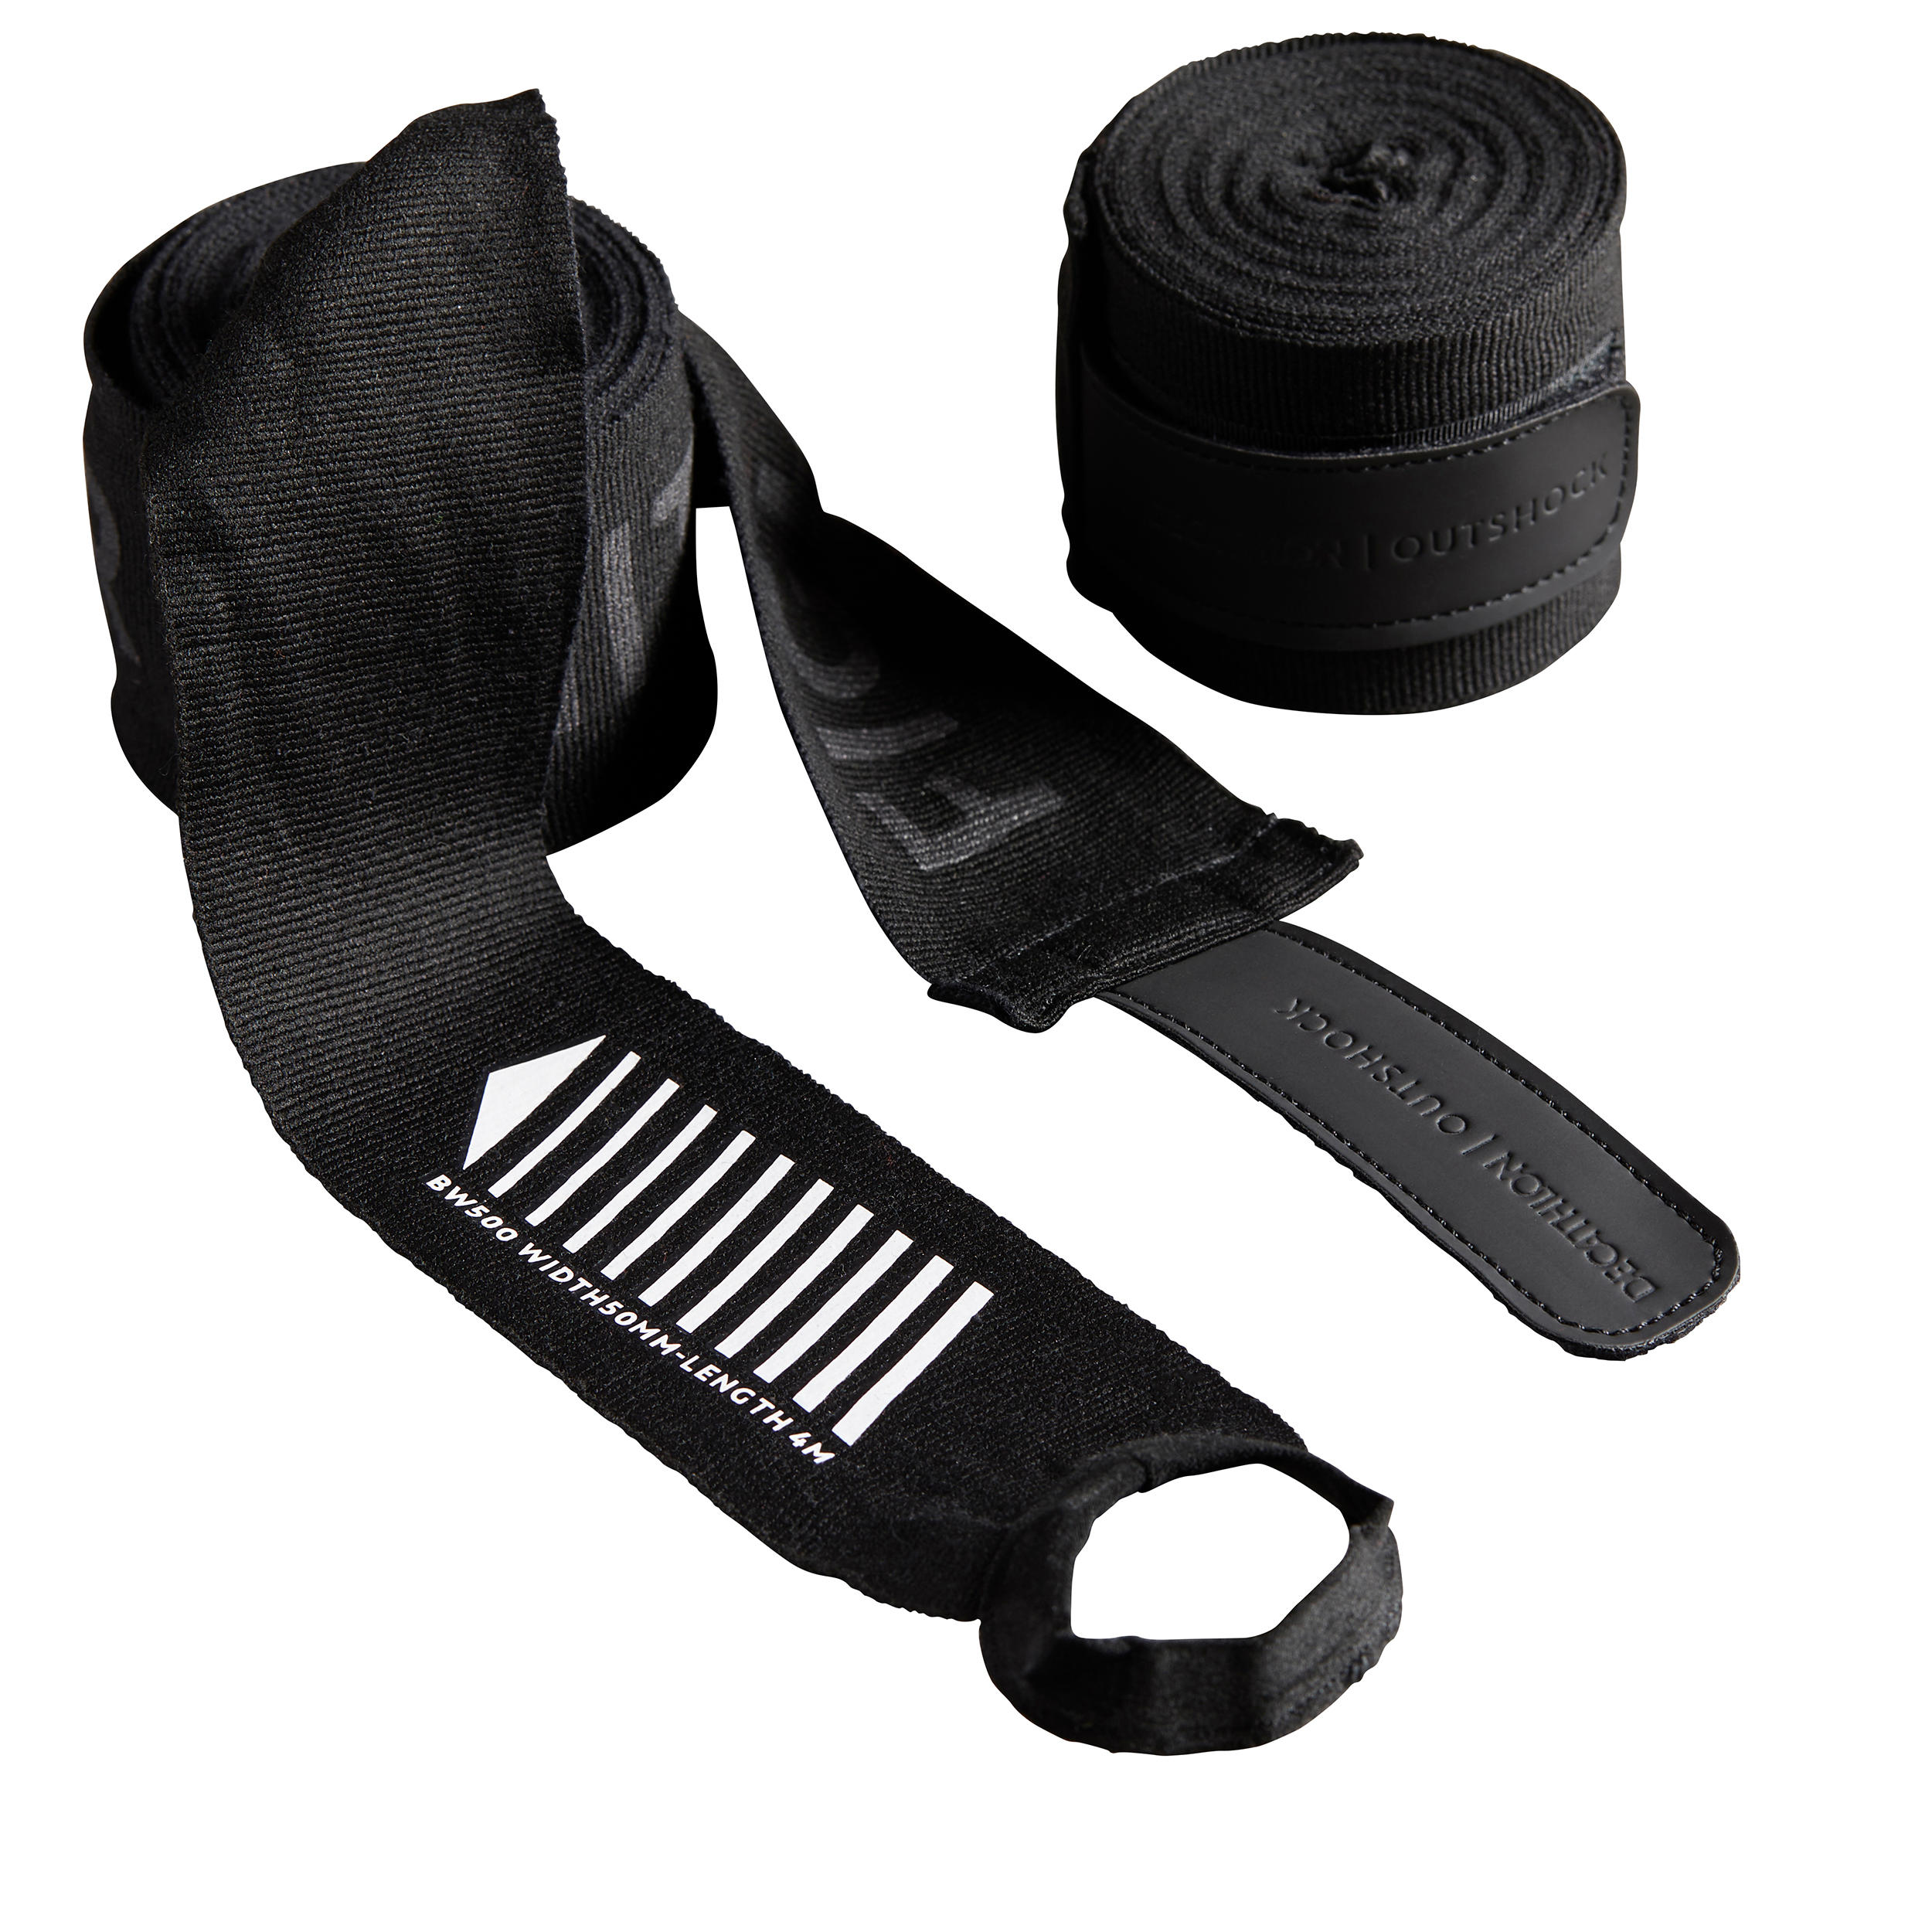 Boxing Wraps and Under Gloves - Decathlon